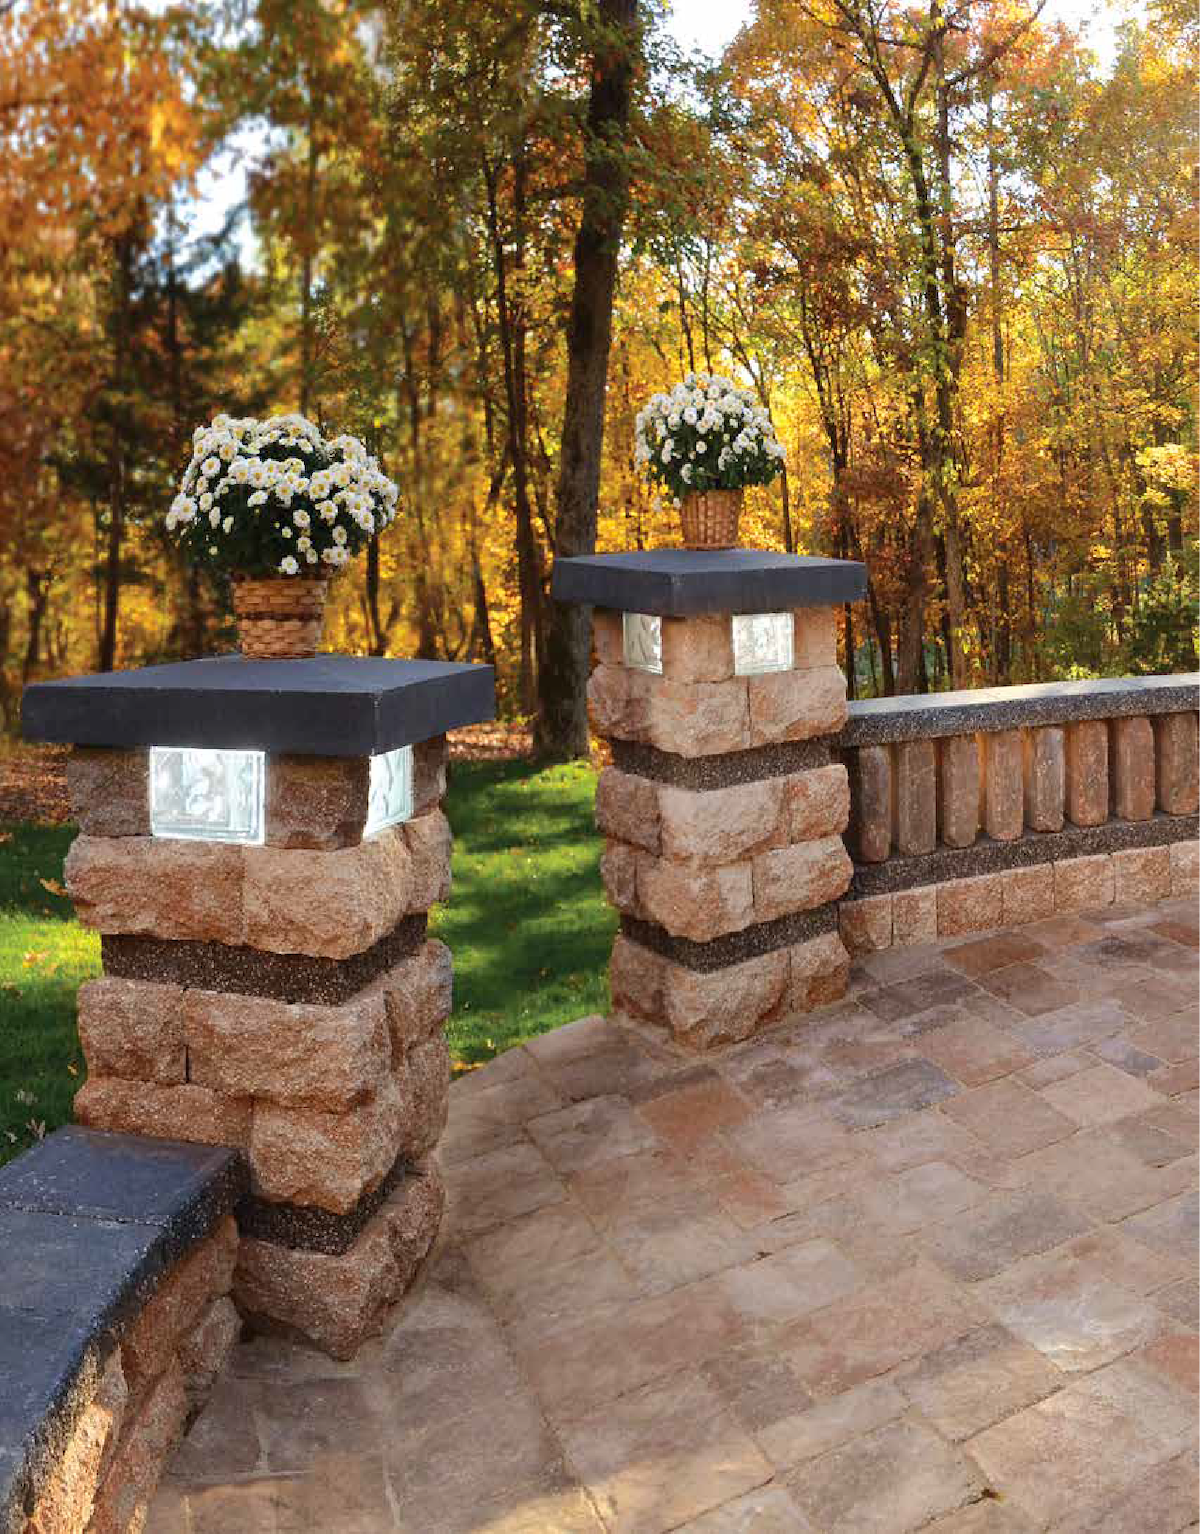 Follow the Foster Family's Story With Dependable Landscape Company Stockman Stoneworks